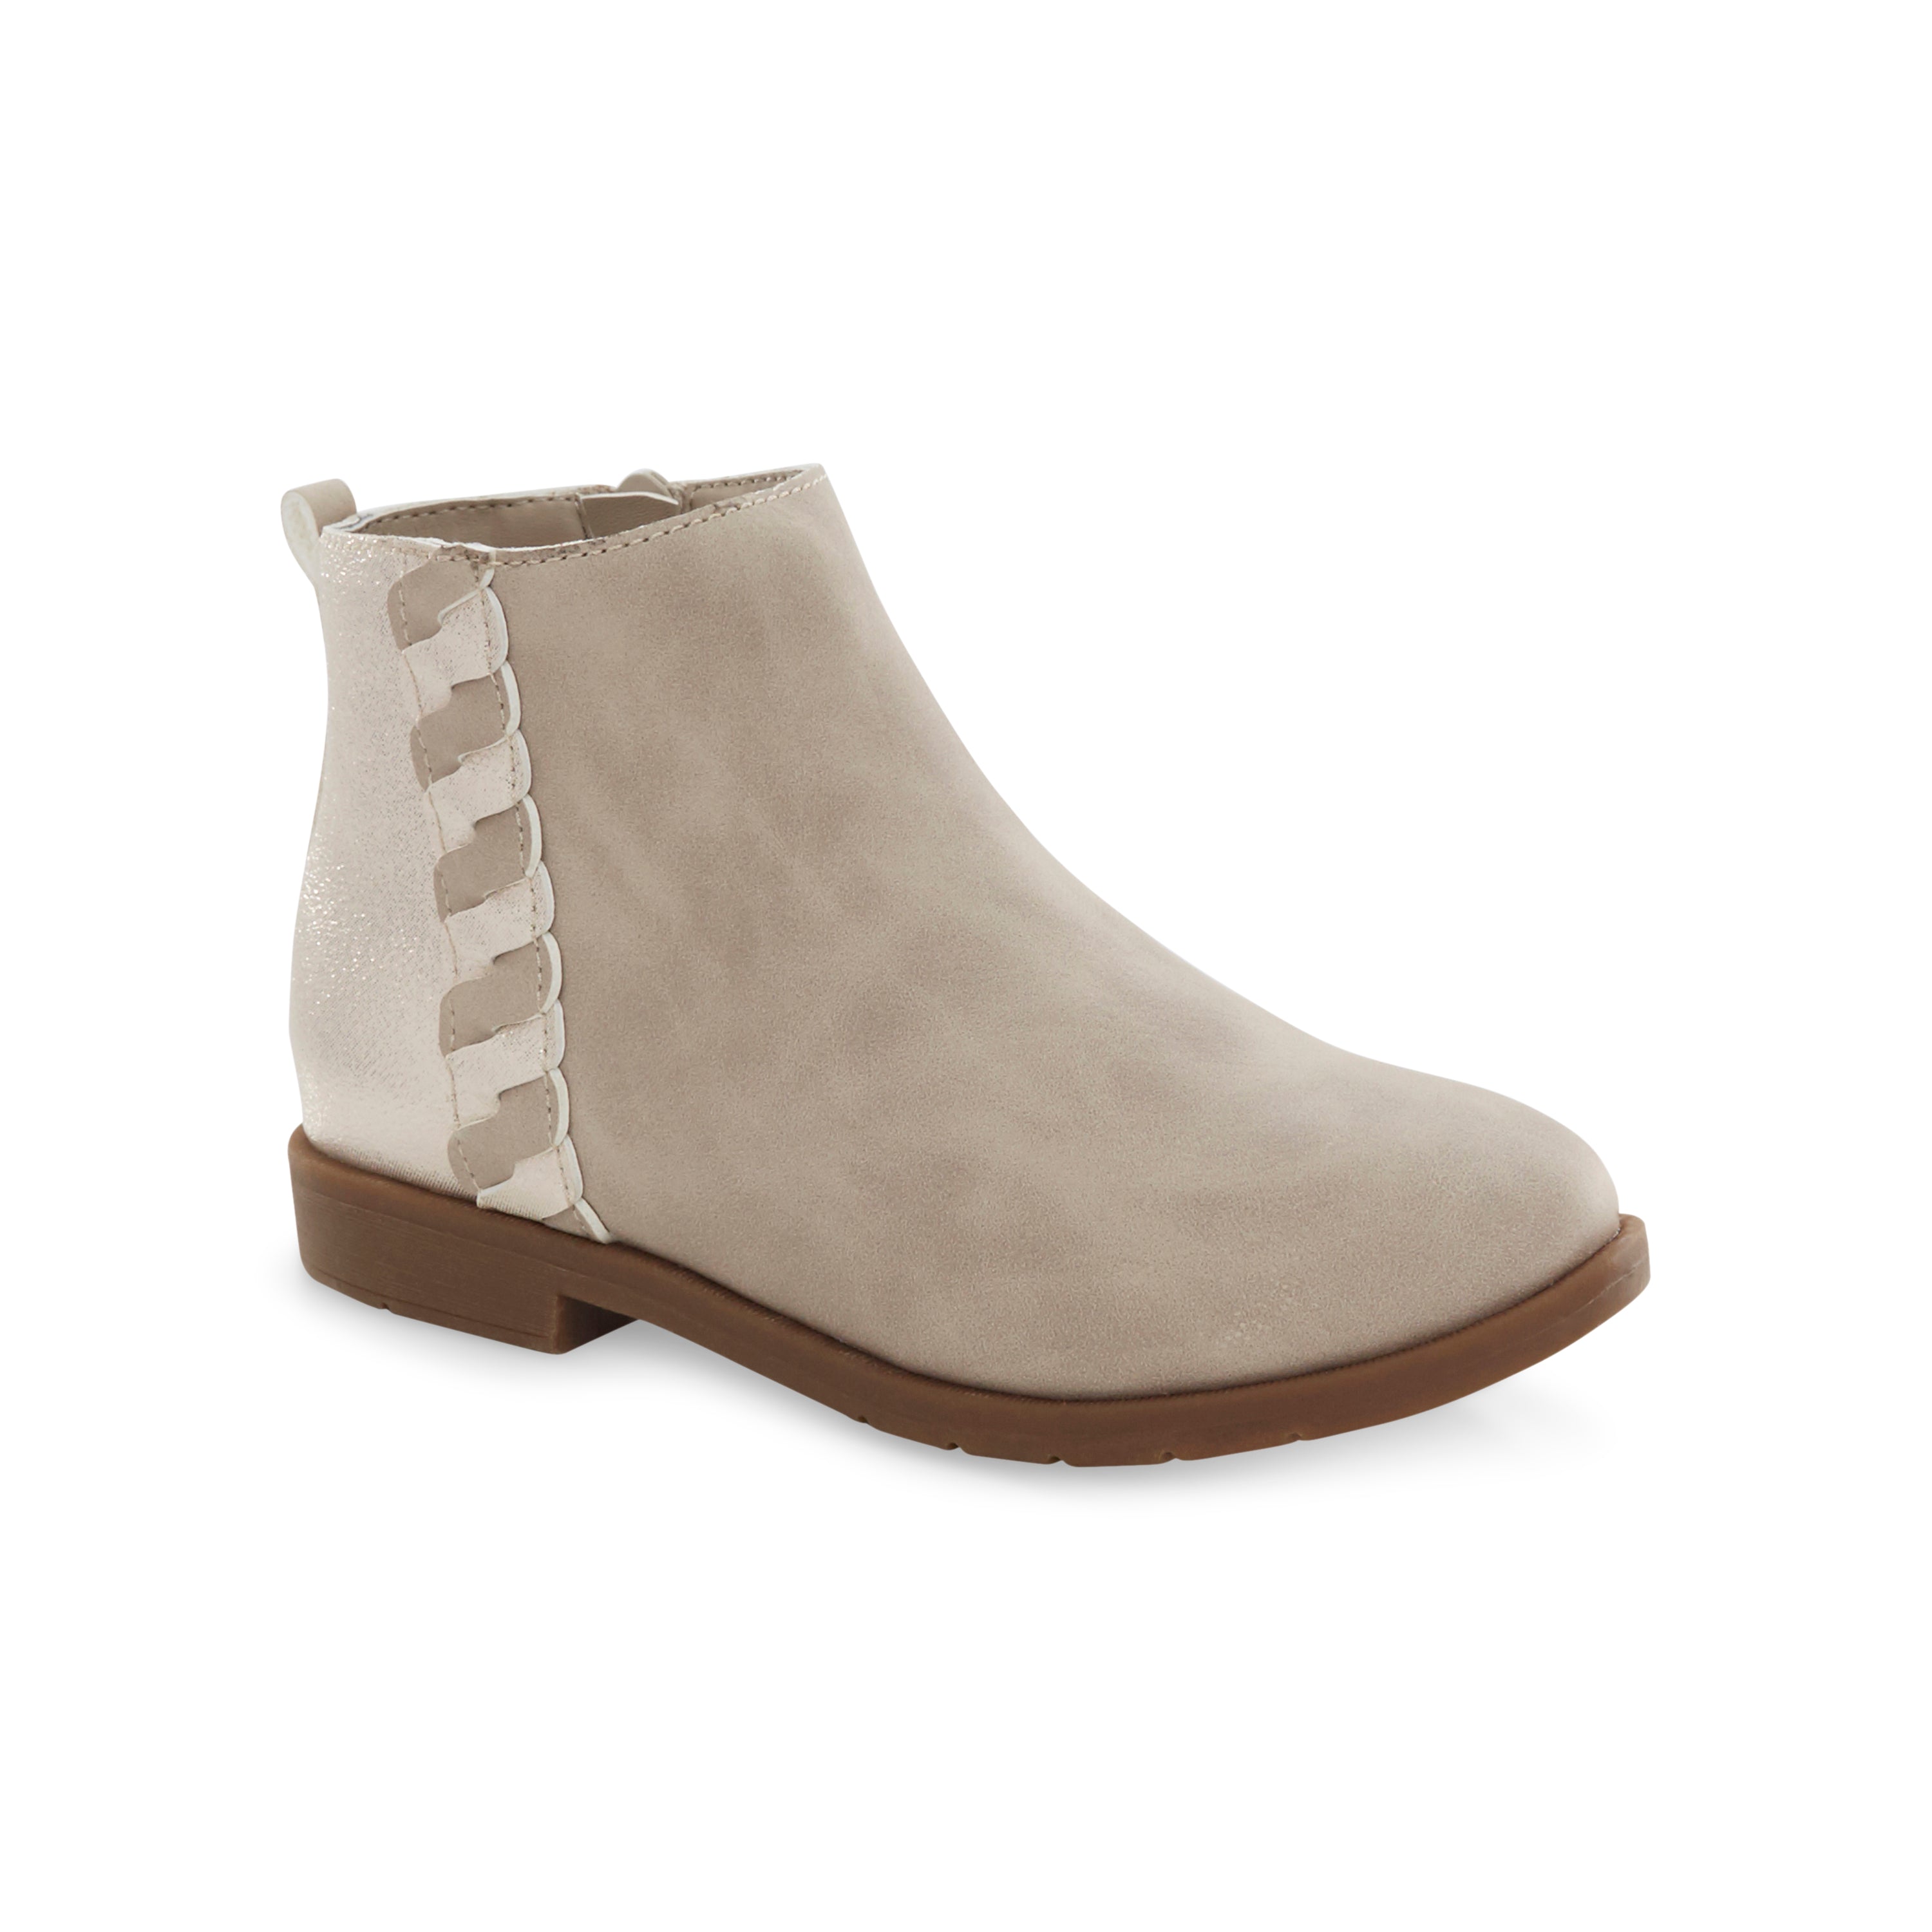 SR Carolyn Kid's Ankle Boot - Taupe